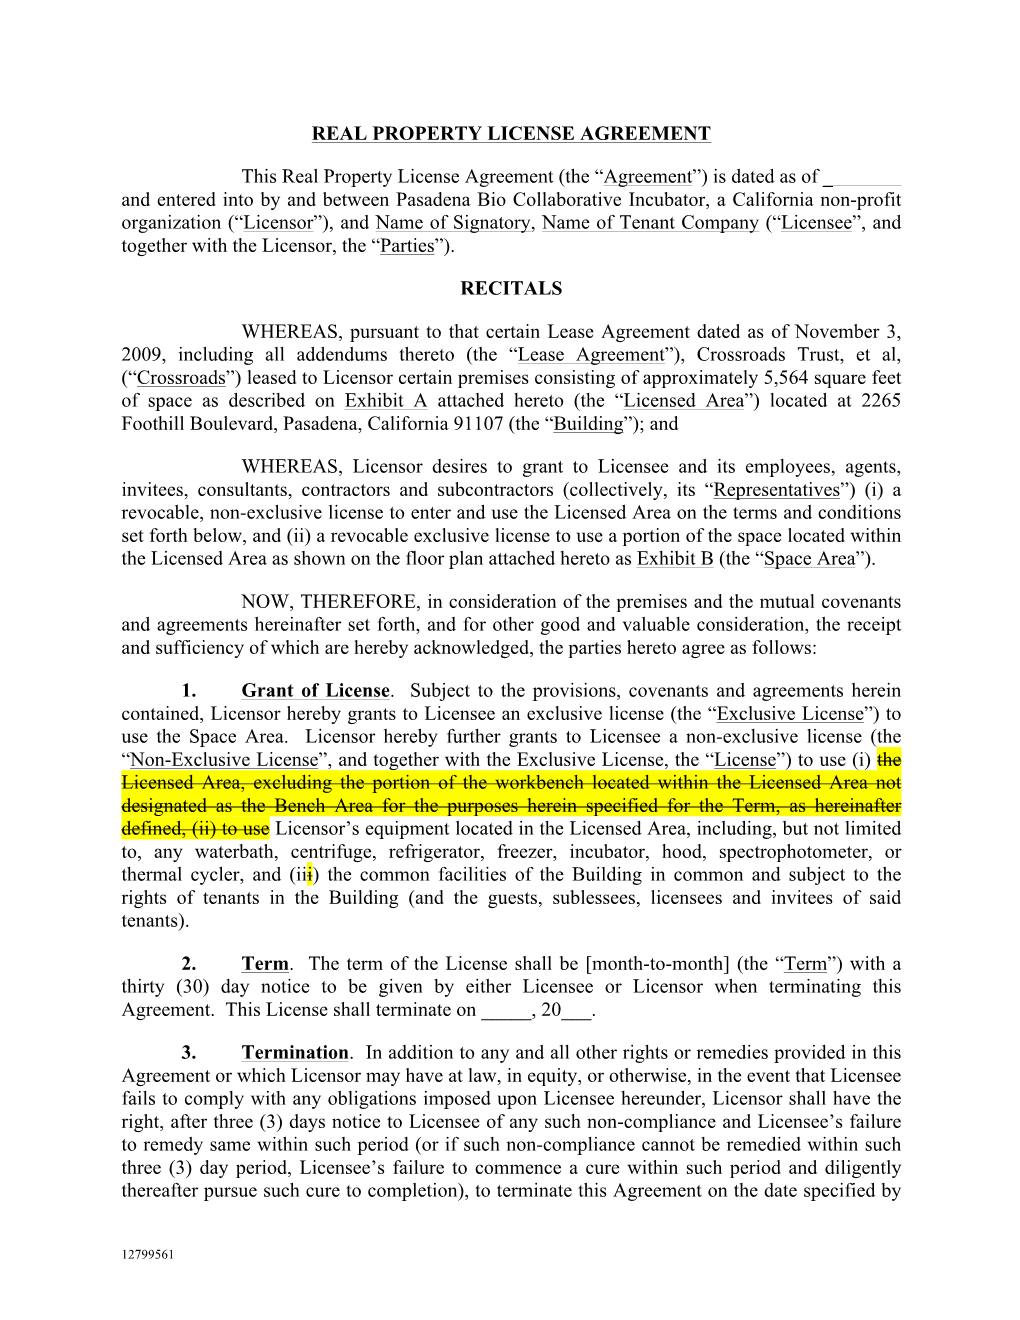 Current REAL PROPERTY LICENSE AGREEMENT Pbc1